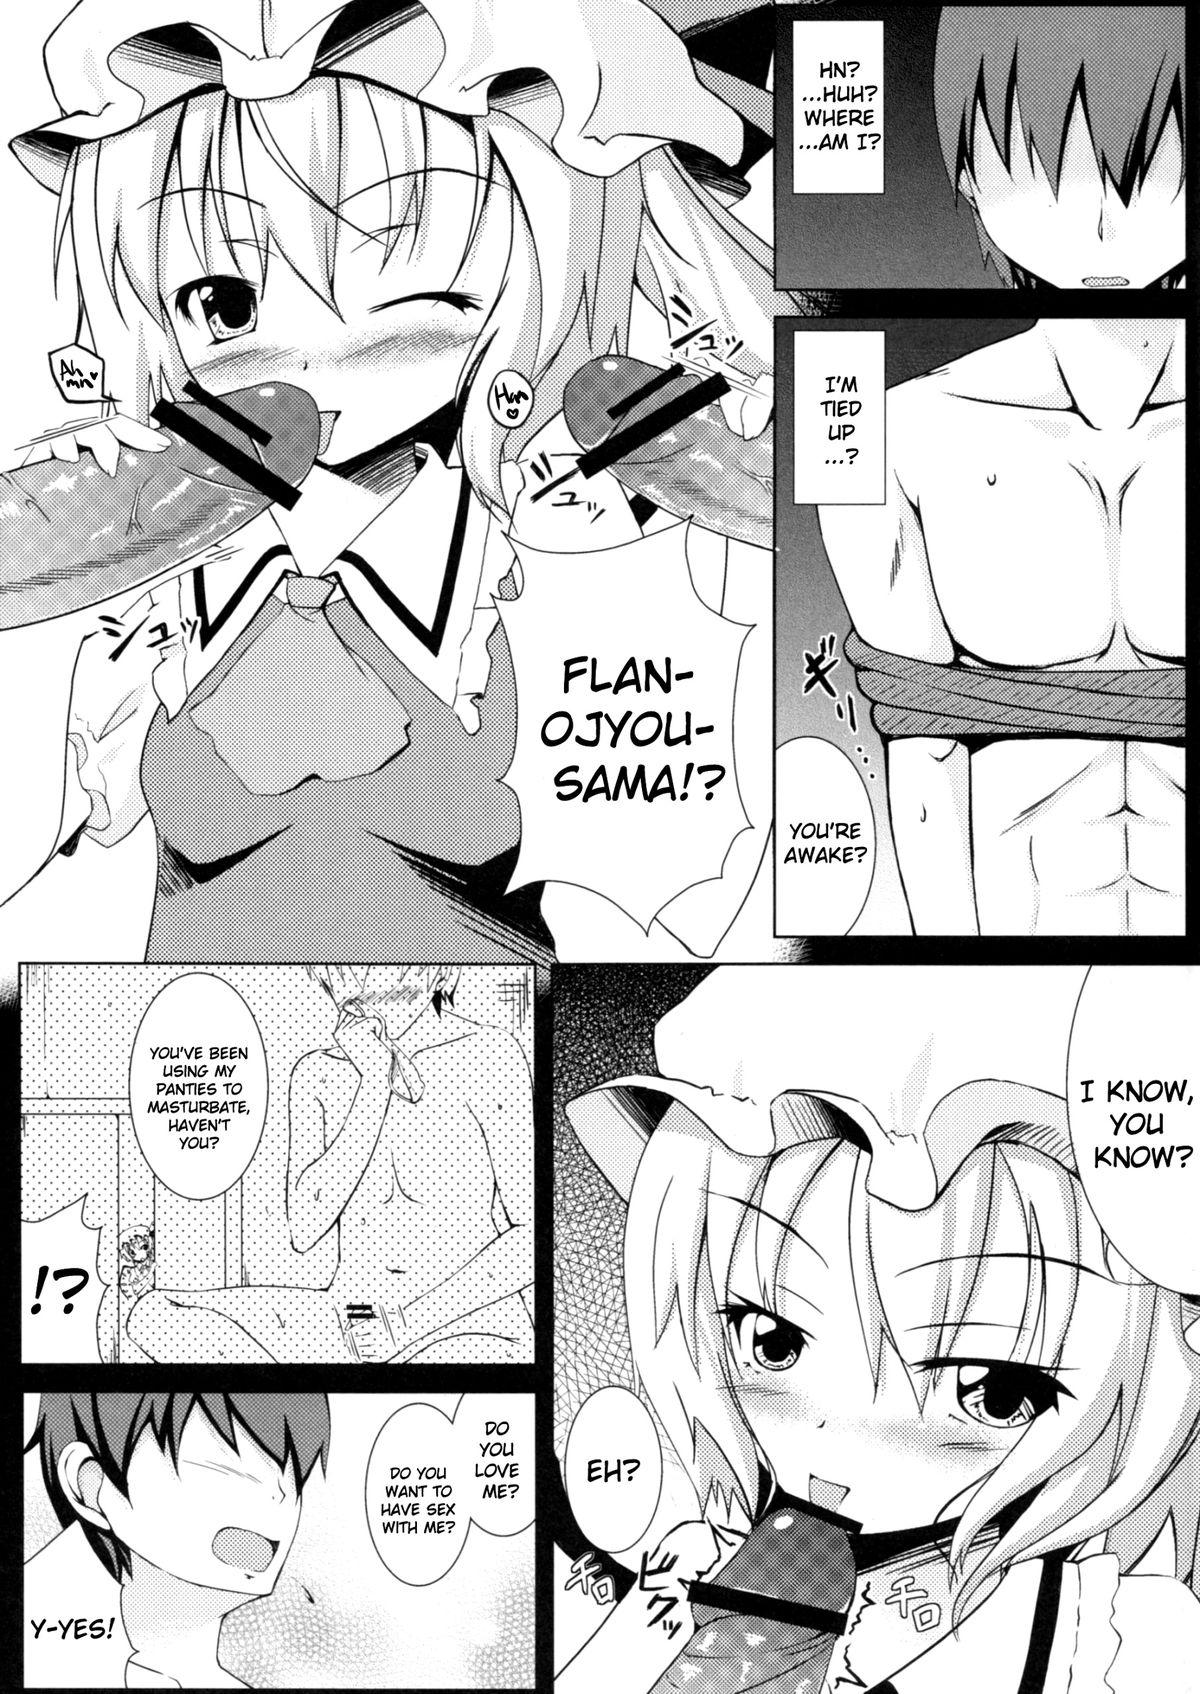 Hotporn NTR Flan-chan - Touhou project Cheating Wife - Page 2